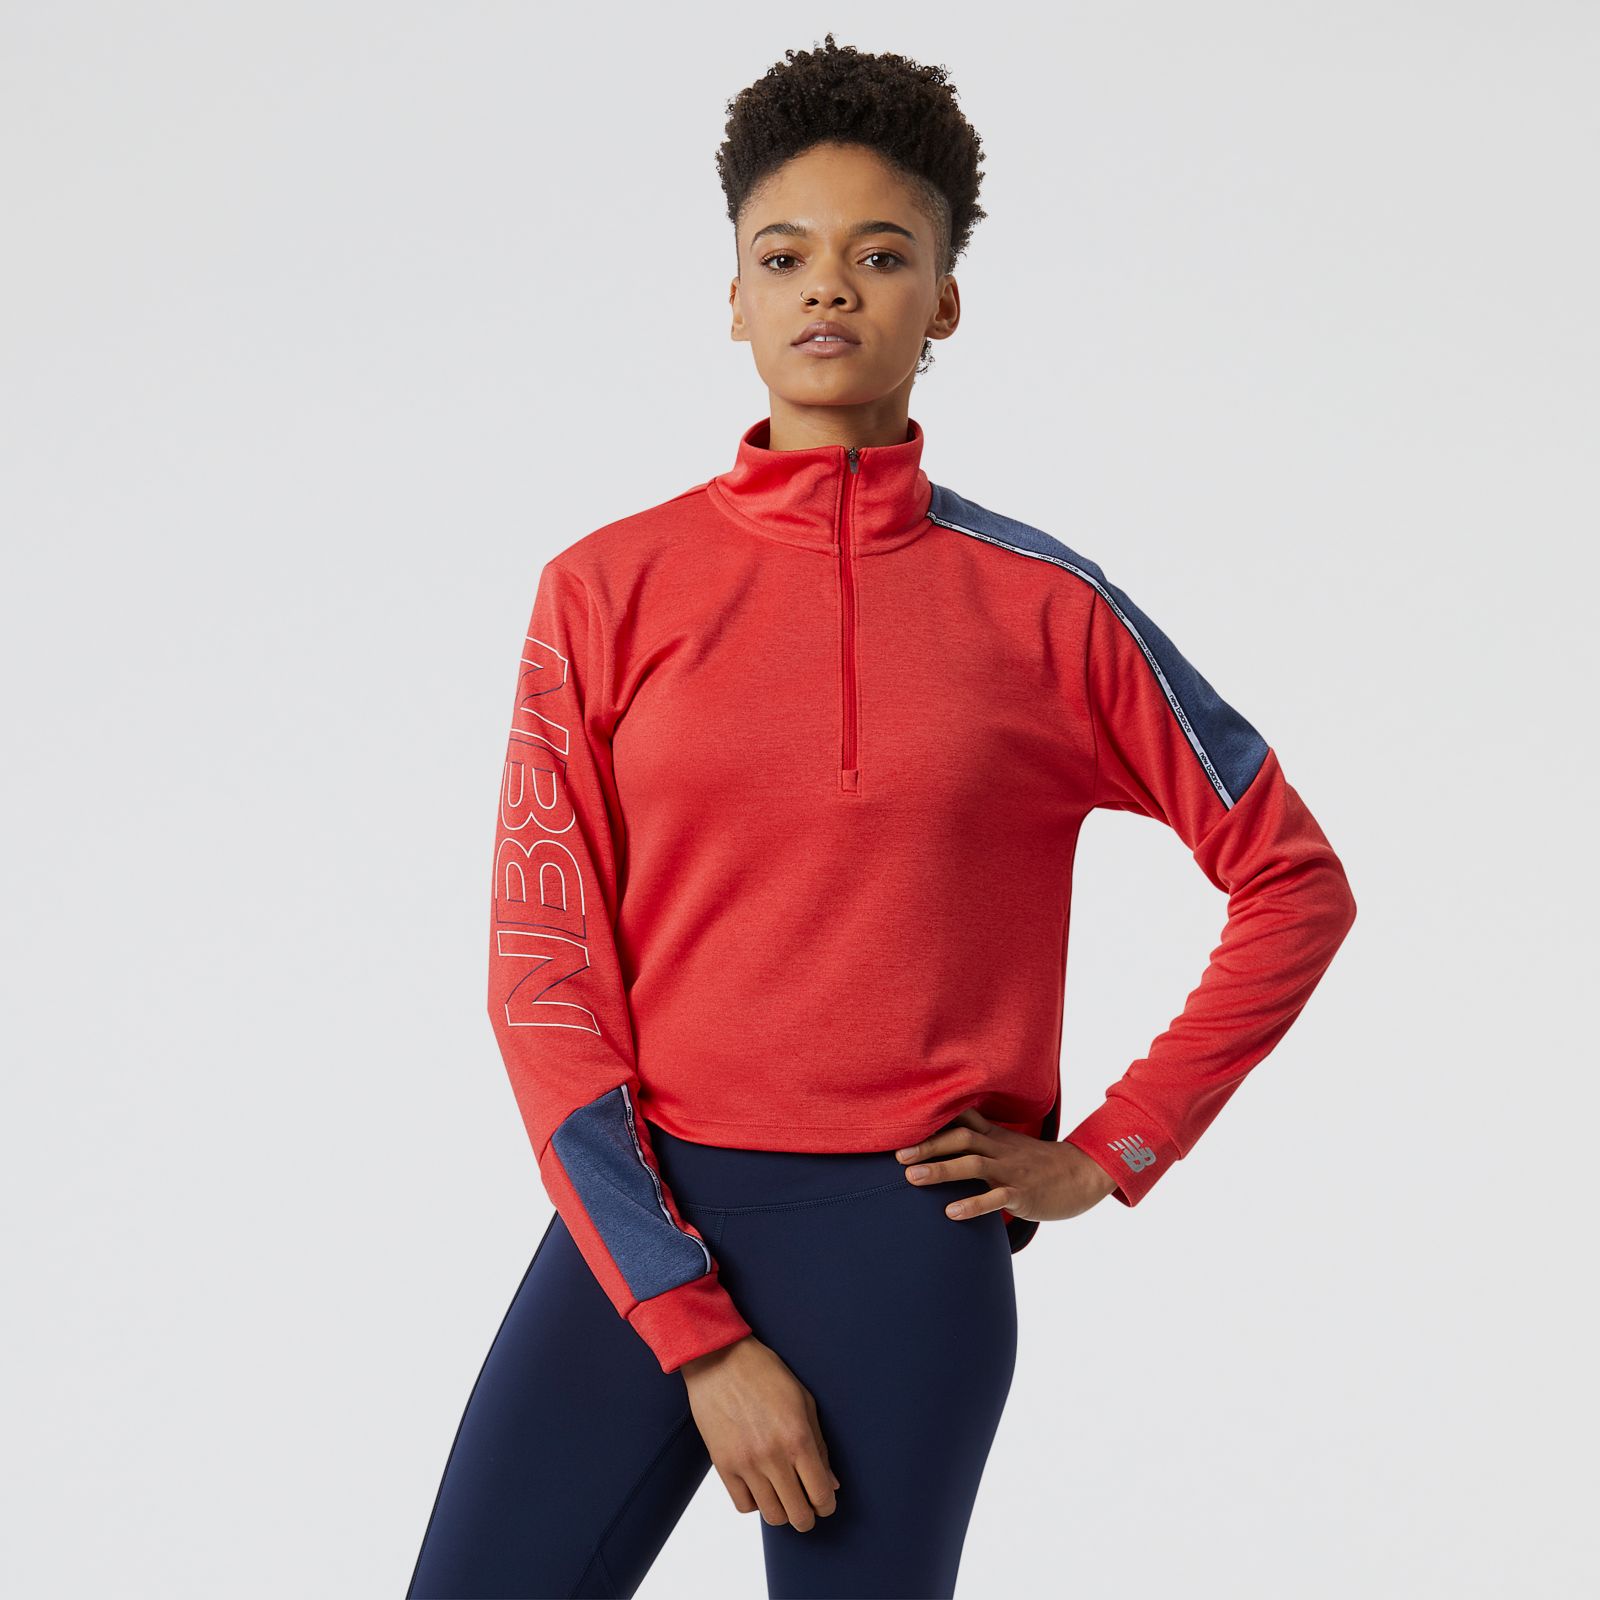 New Balance Buzo Accelerate Pacer Half Zip WT23226, , large